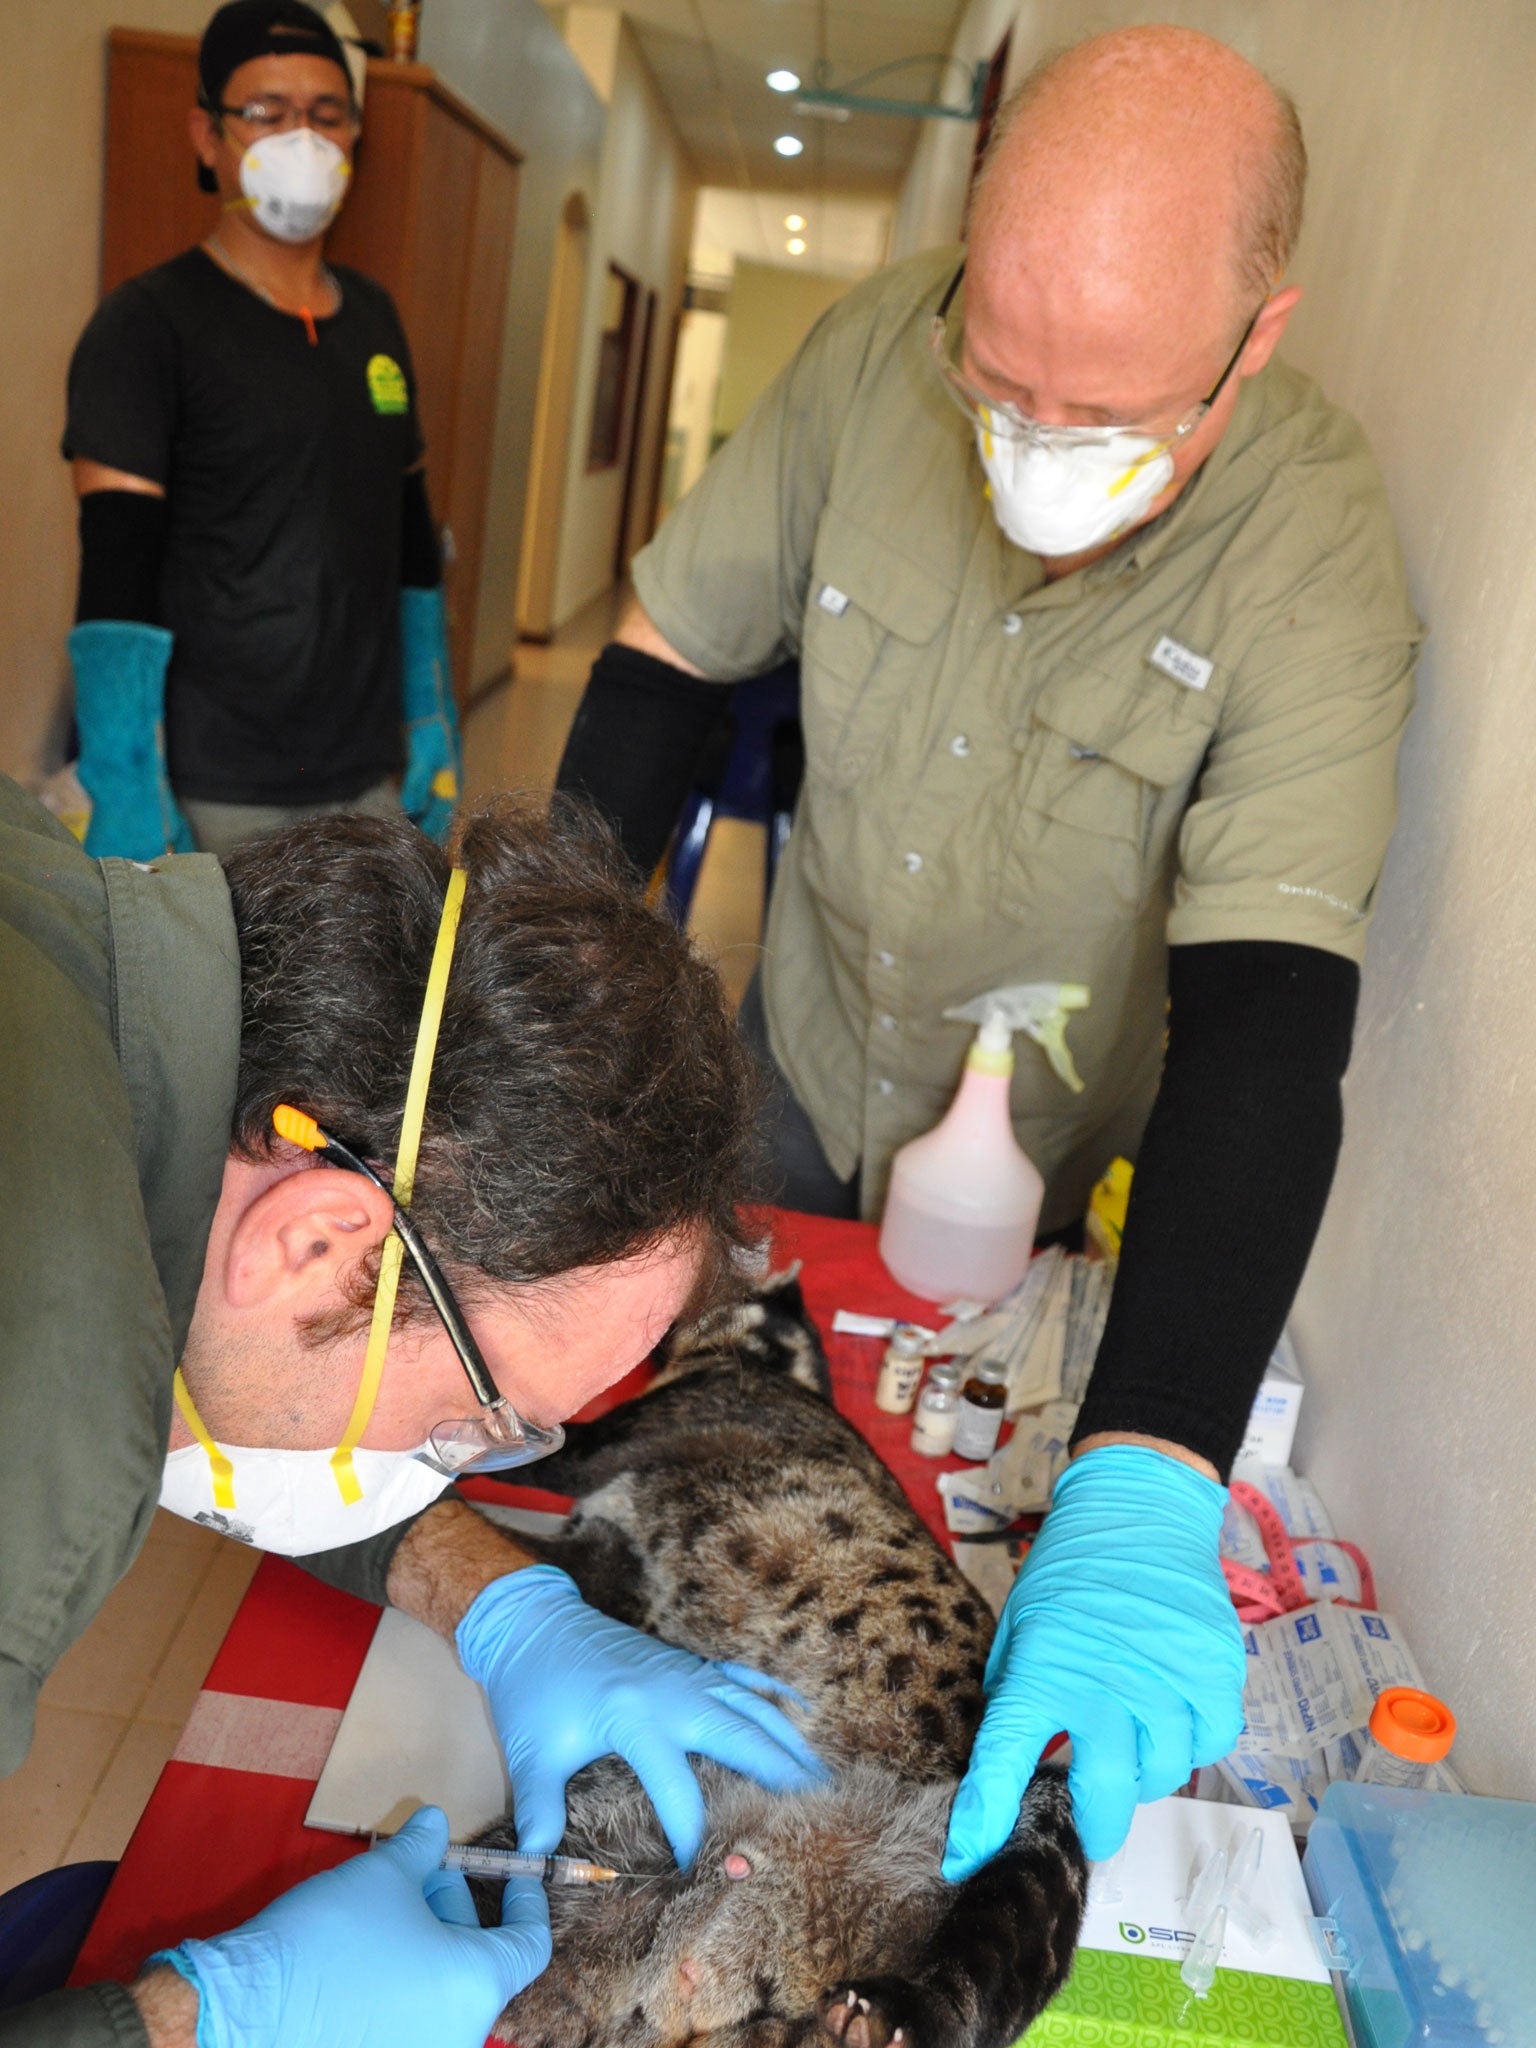 At EcoHealth Alliance’s base in Borneo, samples are taken from an anaesthetised civet. One of these cat-like animals is thought to be behind the Sars epidemic that originated in China in 2003